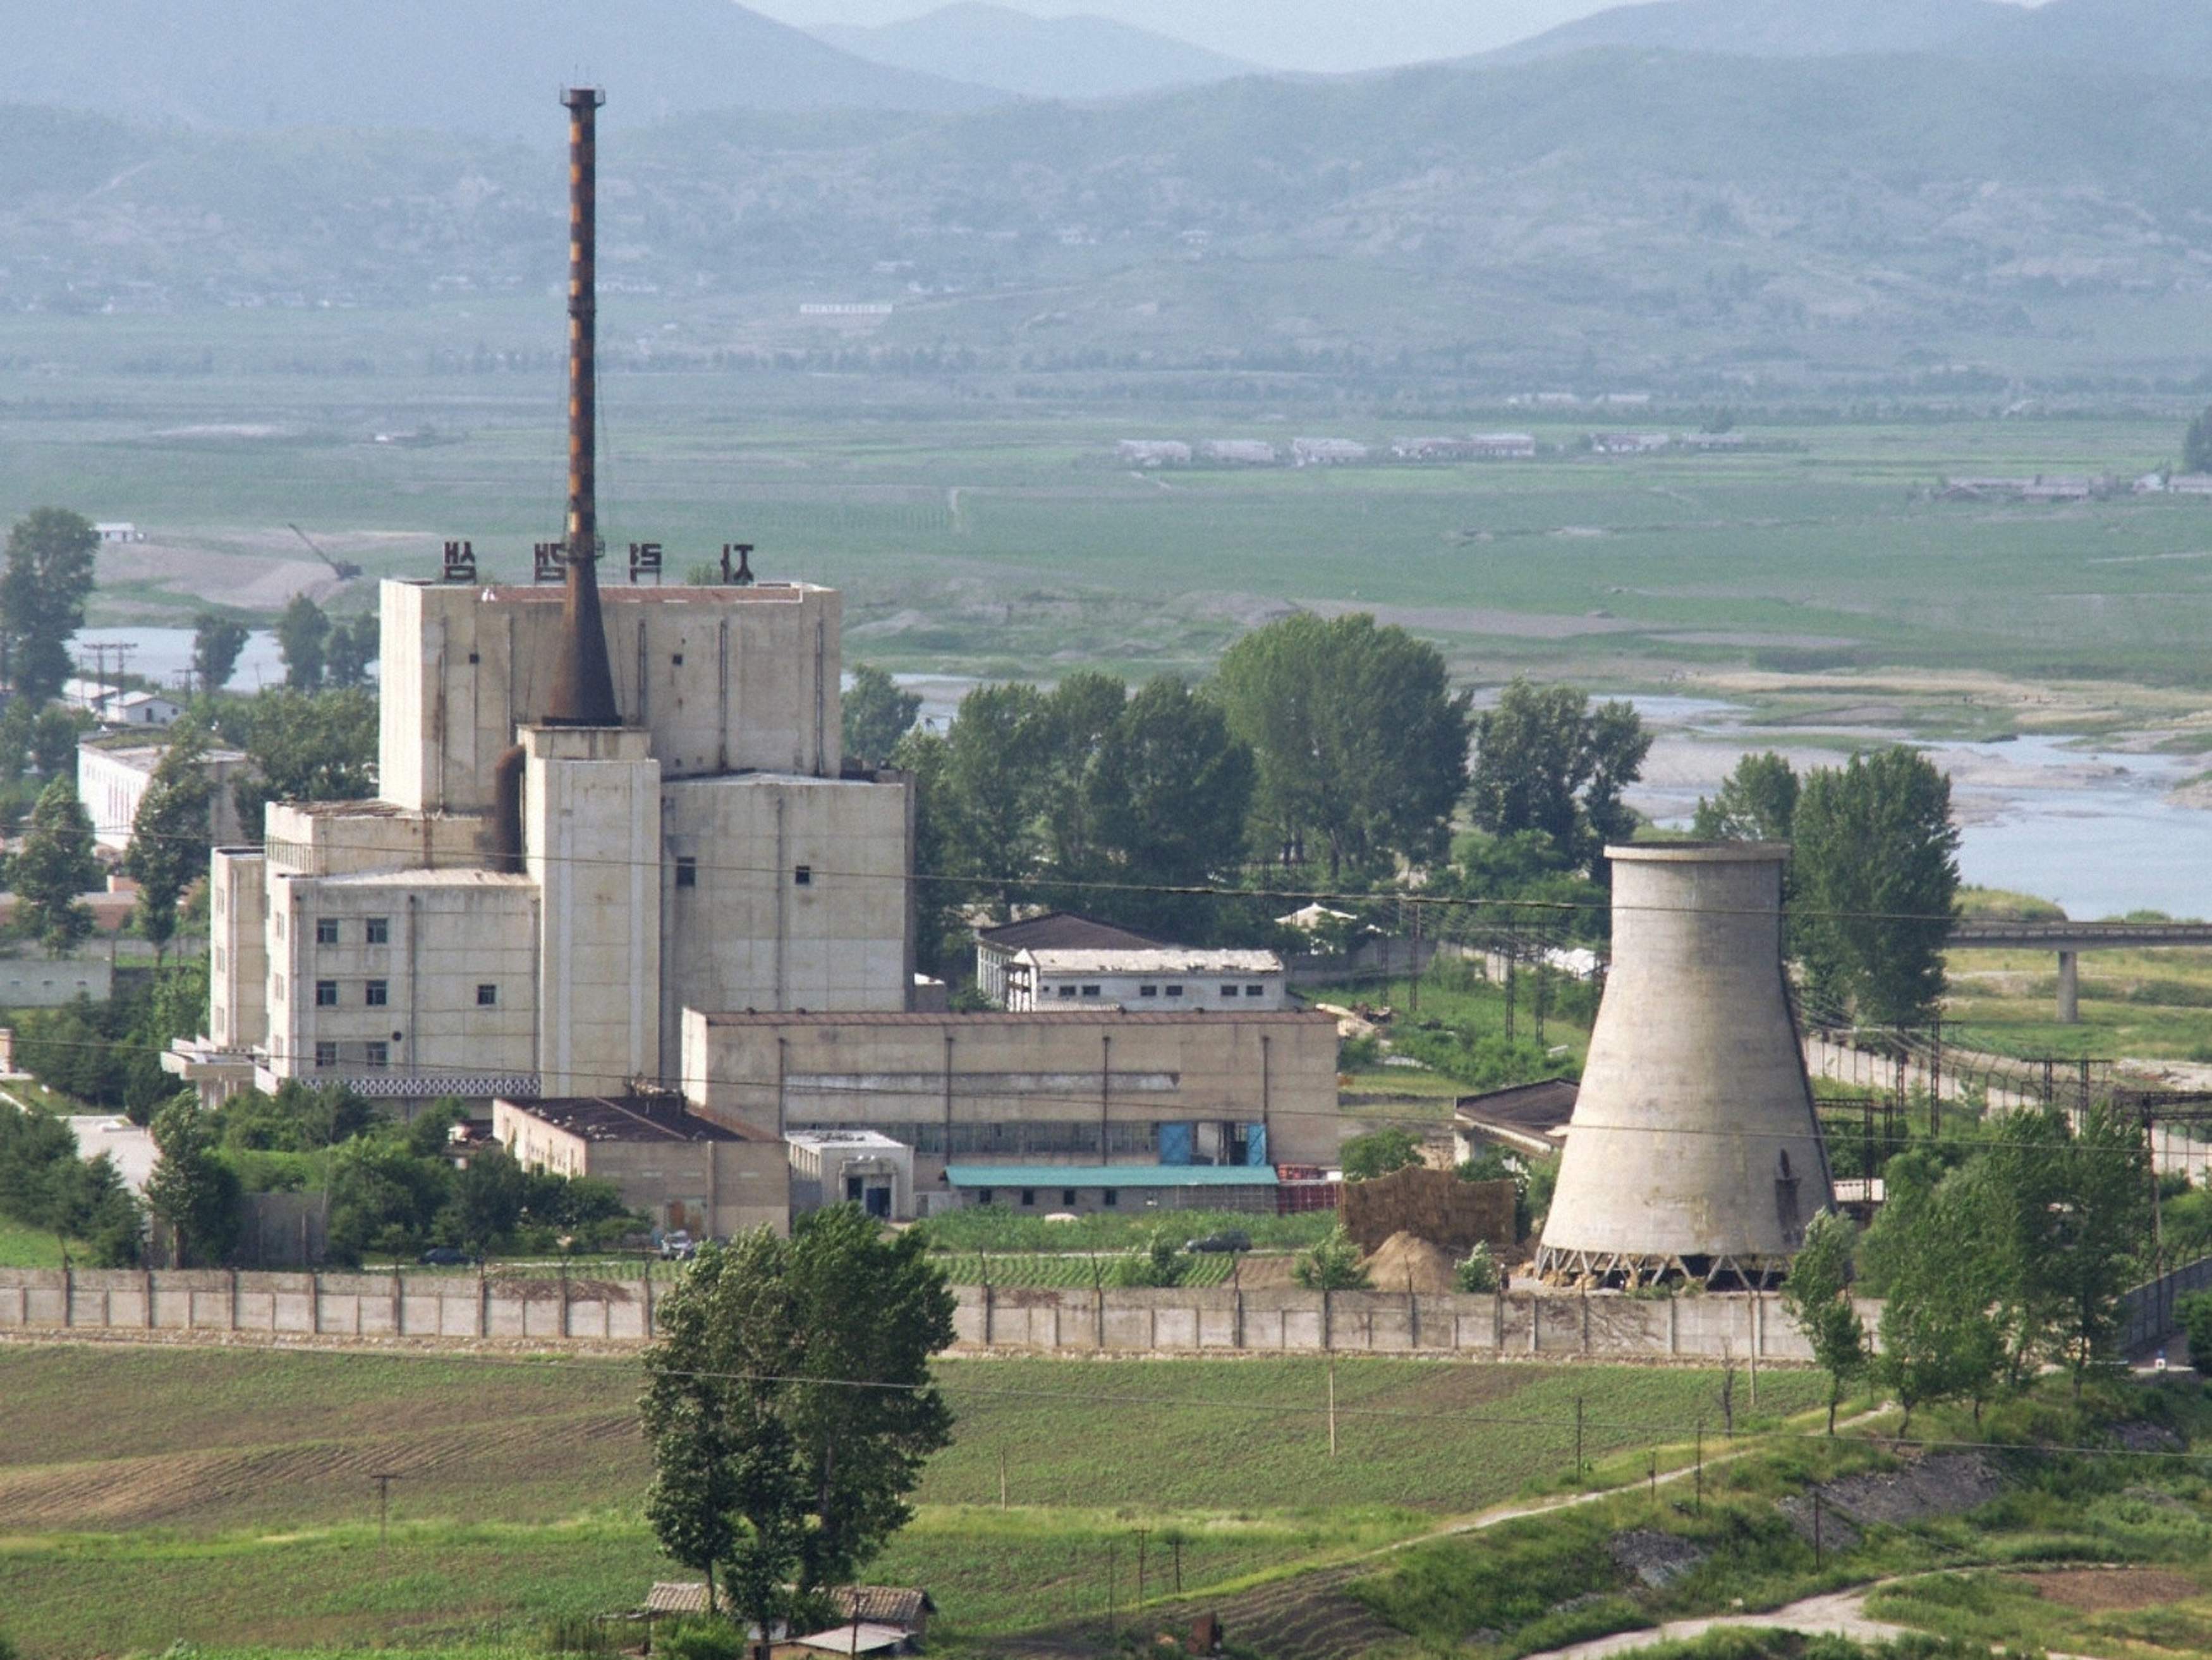 North Korea's Yongbyon nuclear reactor pictured in 2008. Photo: Reuters.